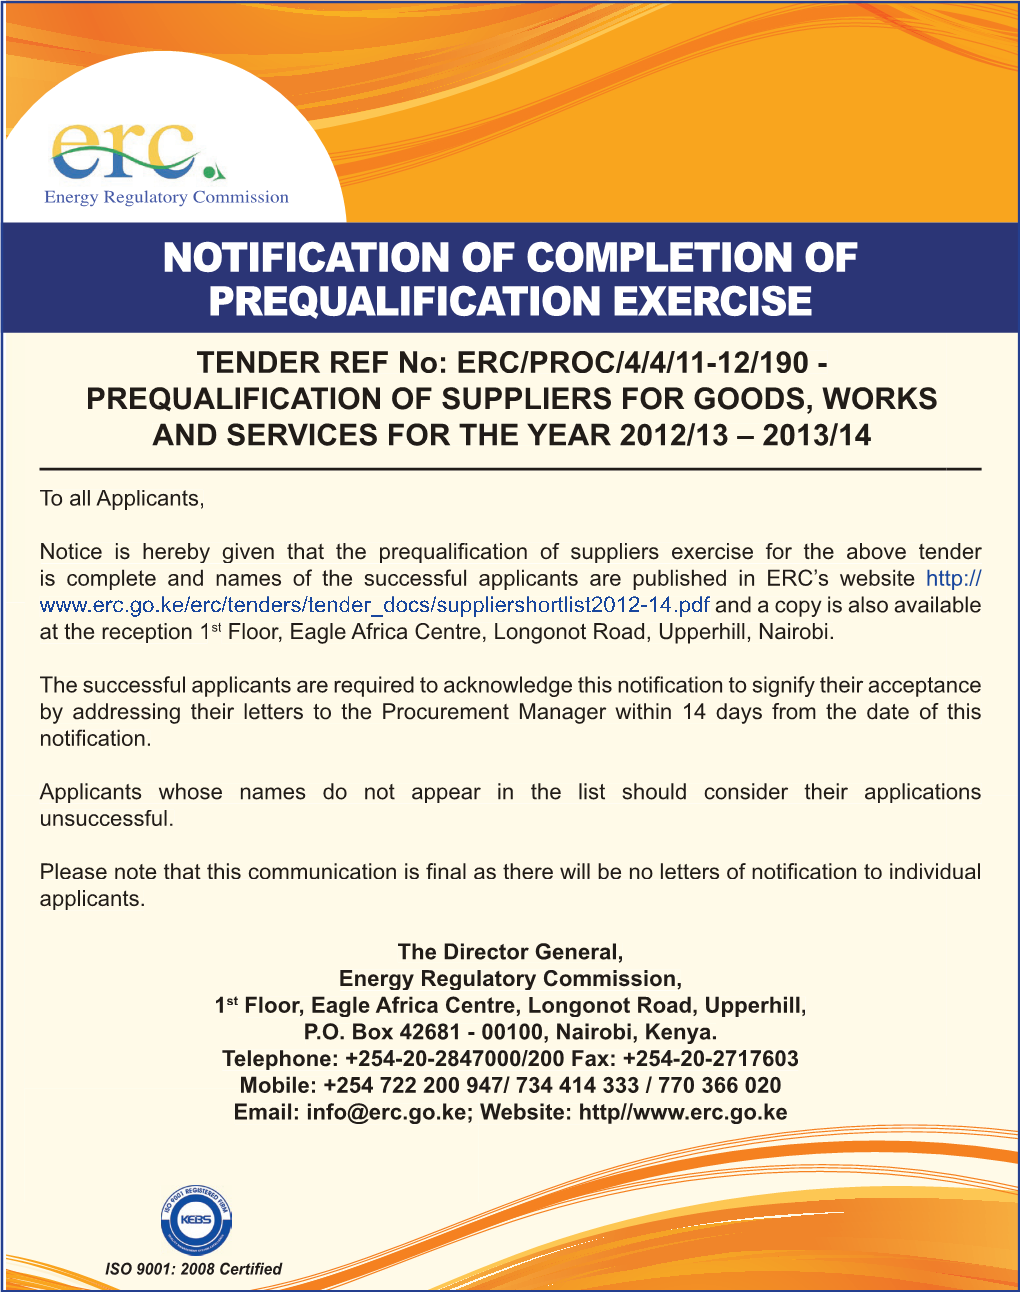 Notification of Completion of Prequalification Exercise